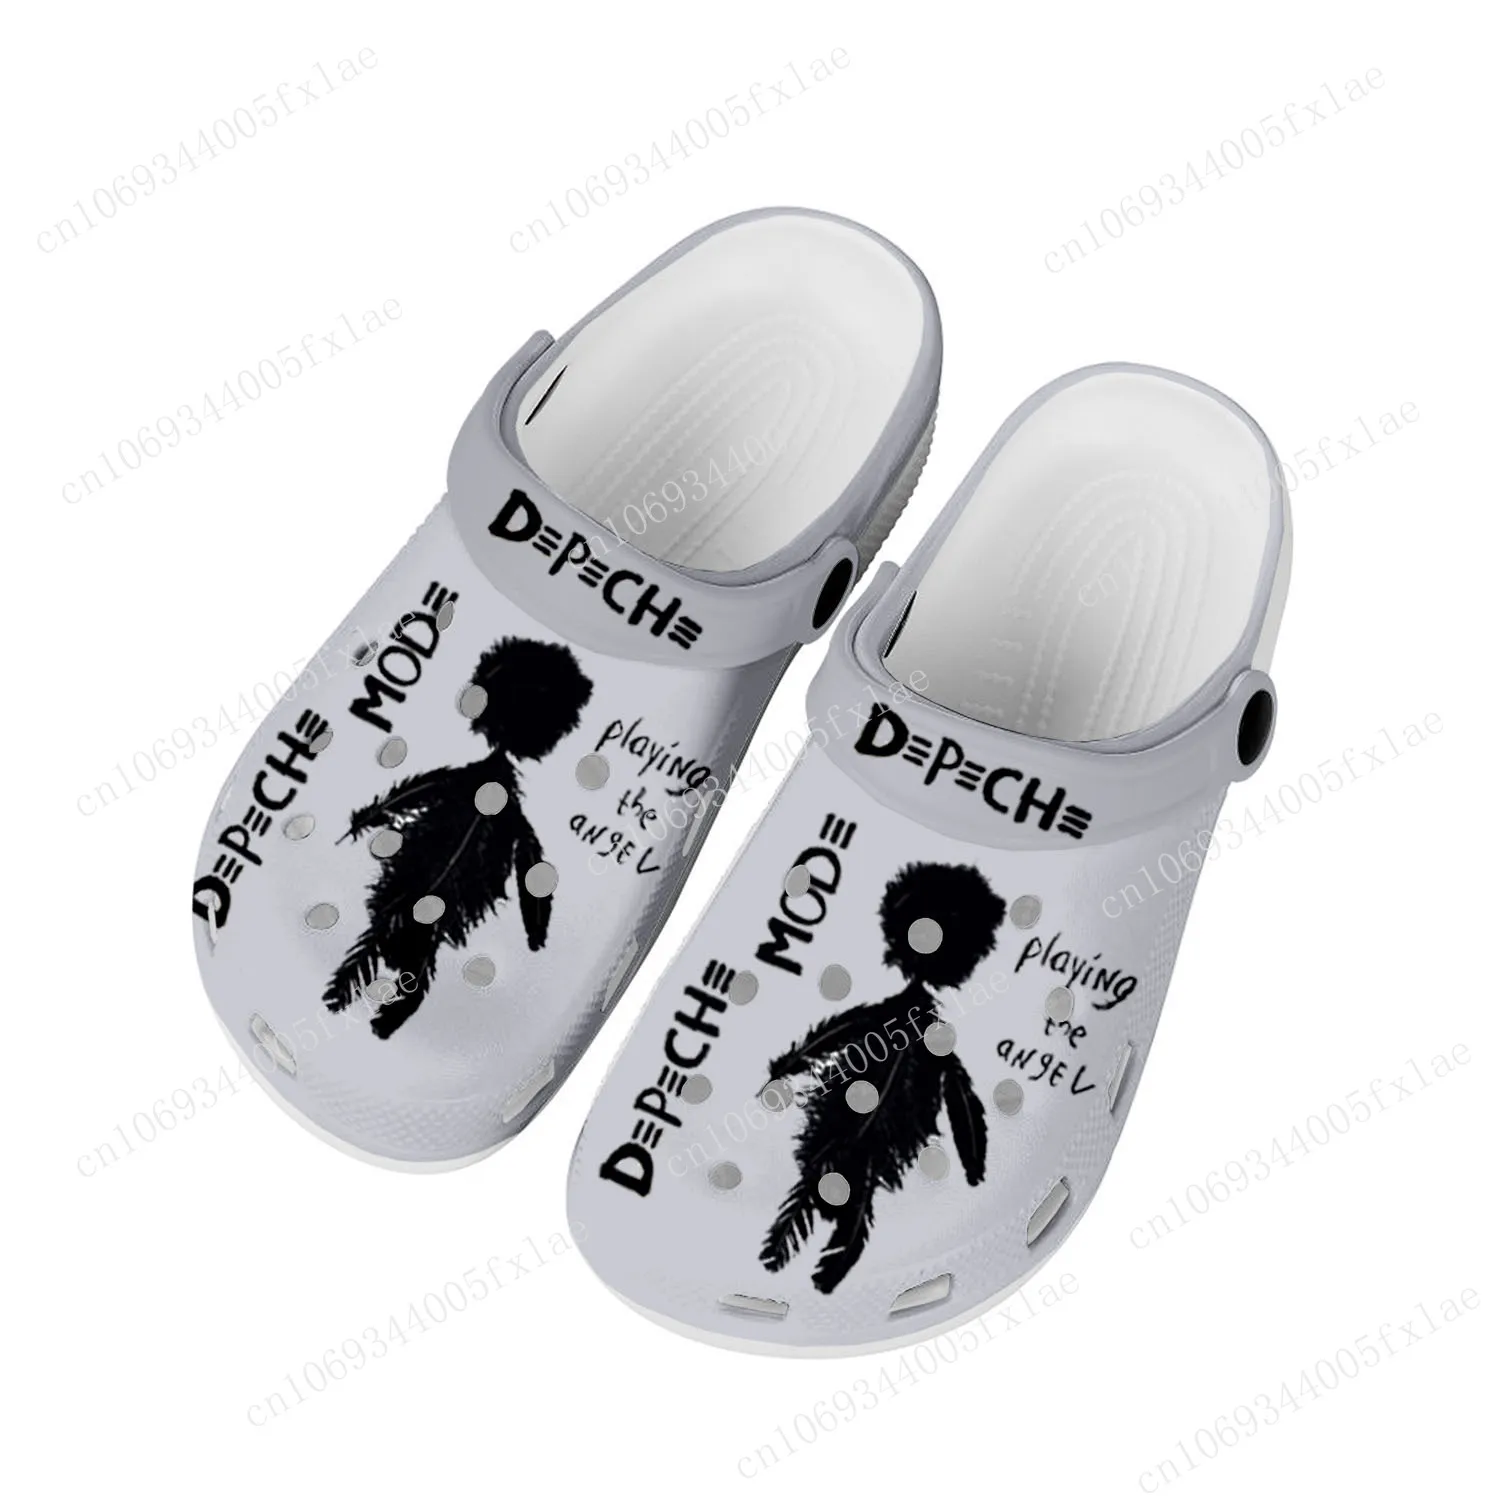 

Depeche Rock Band Mode Home Clogs Custom Water Shoes Mens Womens Teenager Shoe Garden Clog Breathable Beach Hole Slippers White